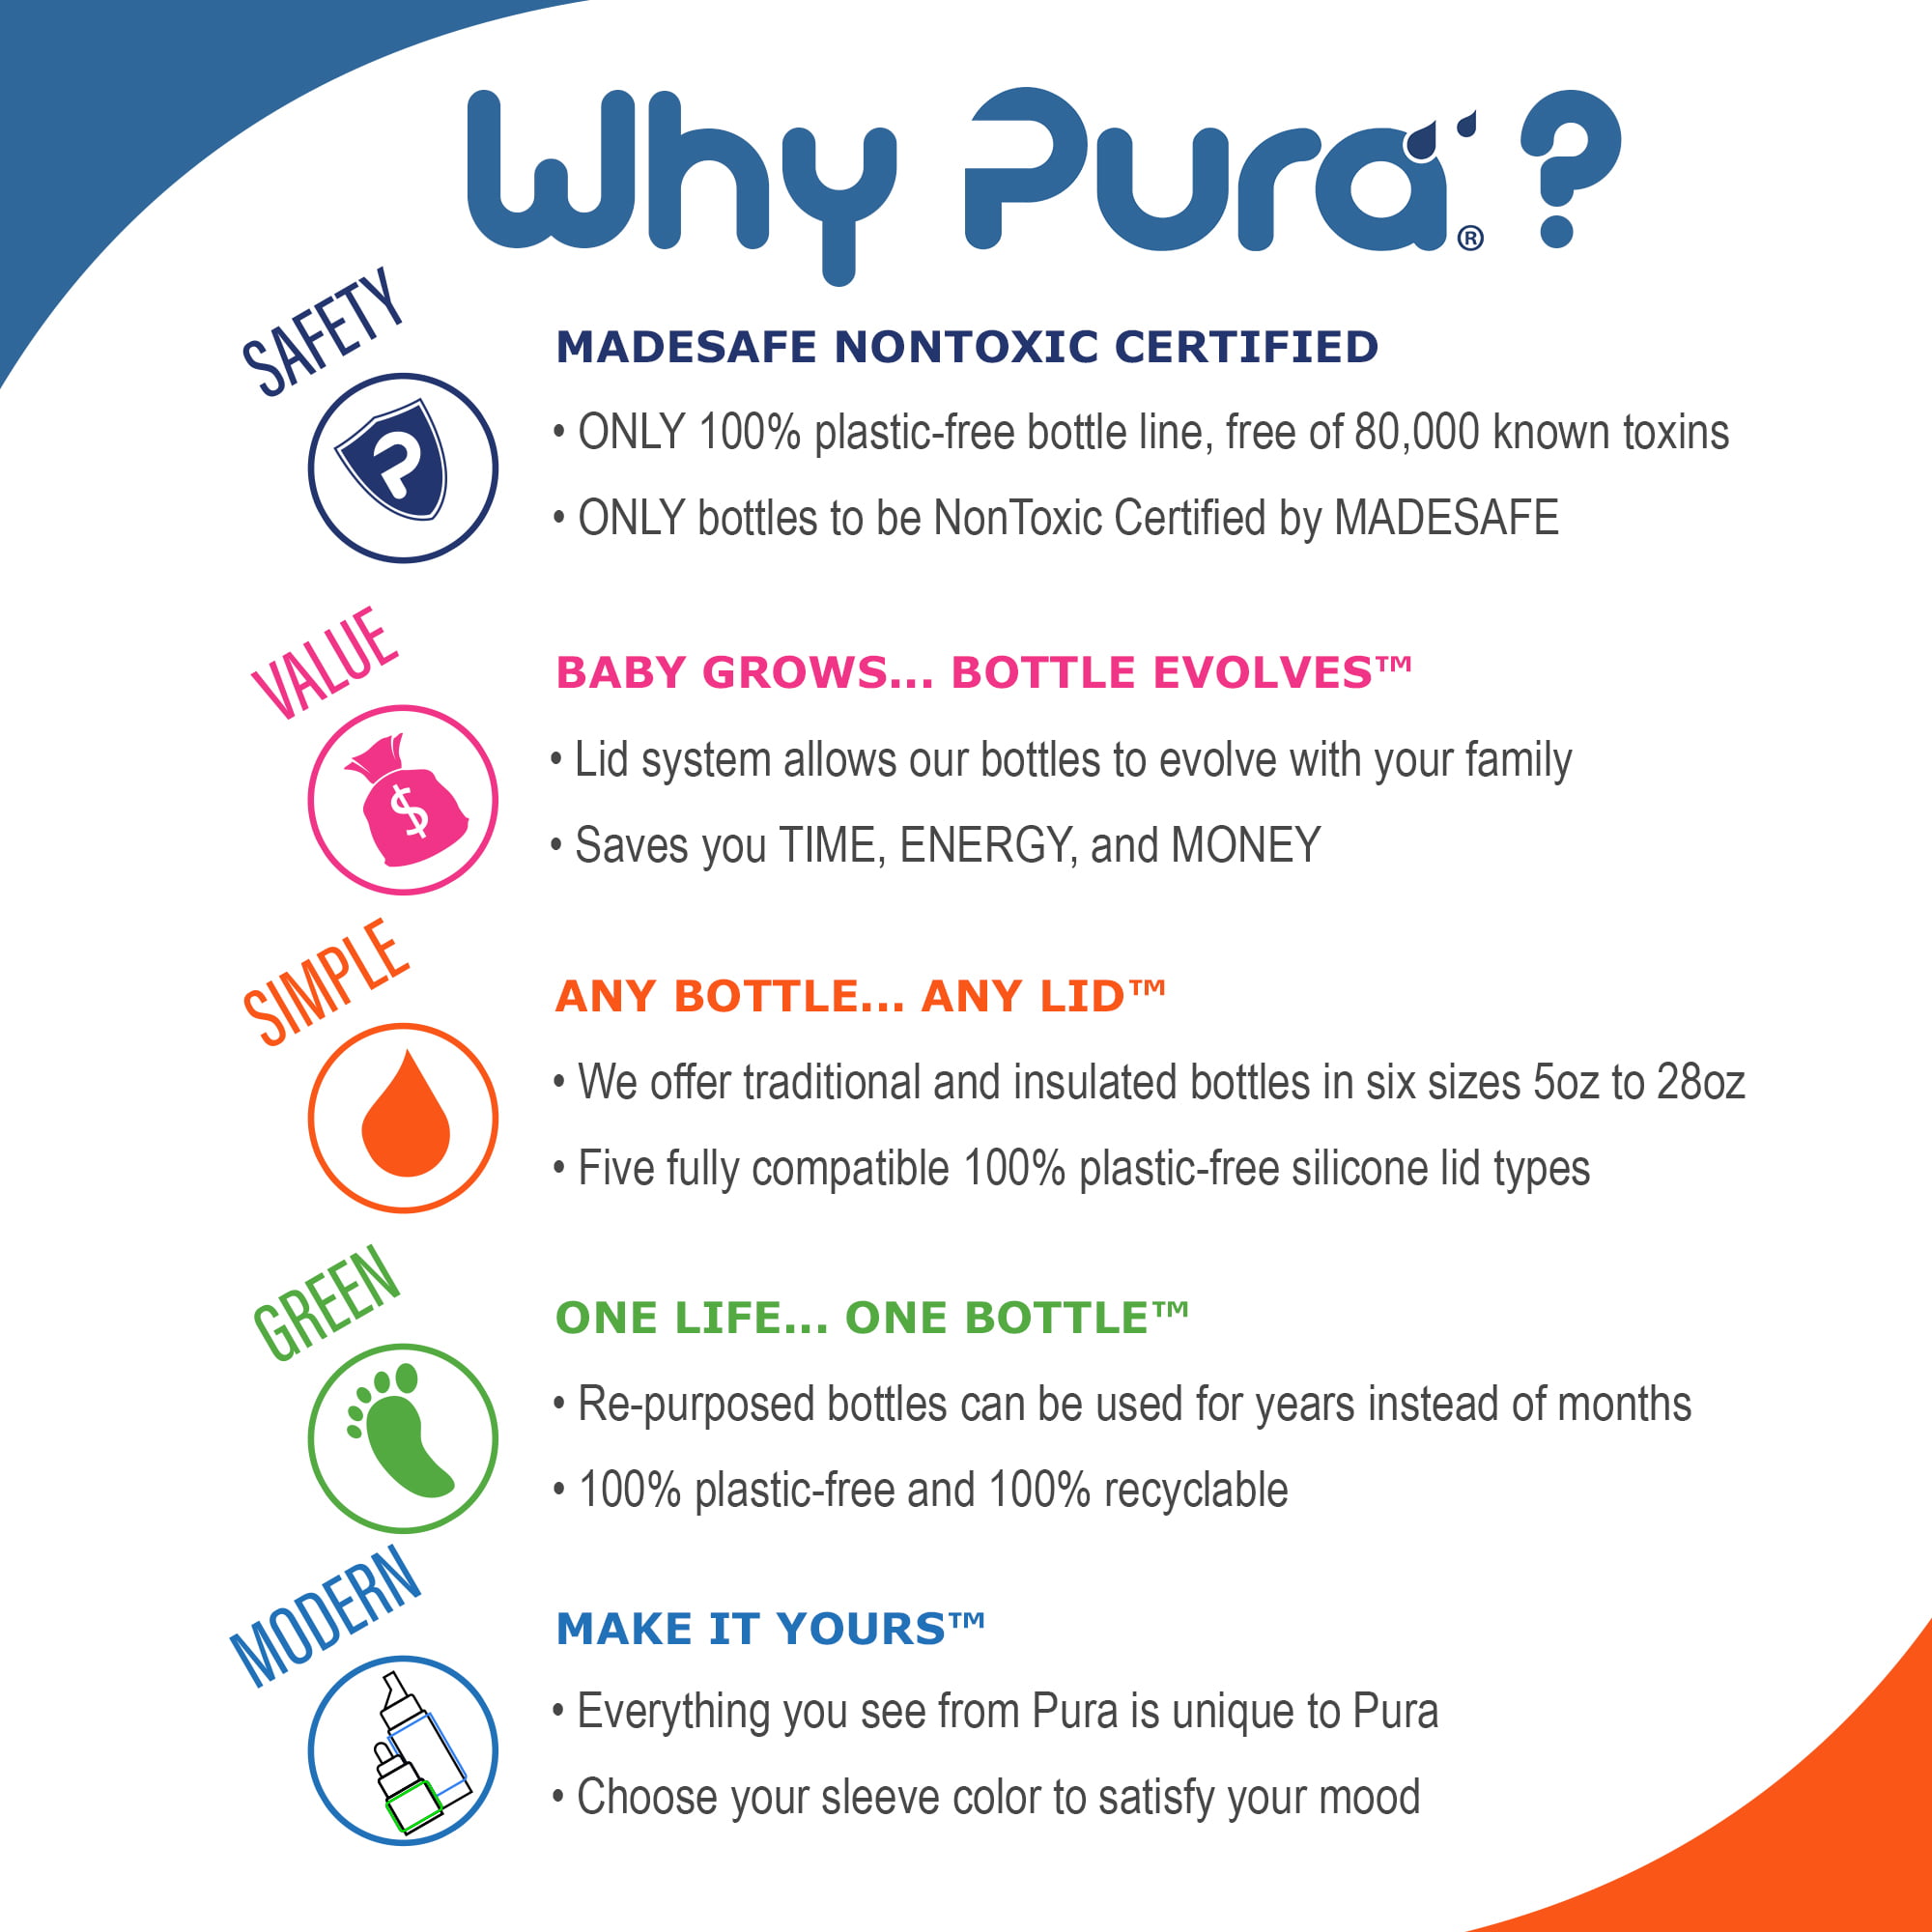 Pura Sport 18 OZ/550 ML Stainless Steel Water Bottle with Silicone